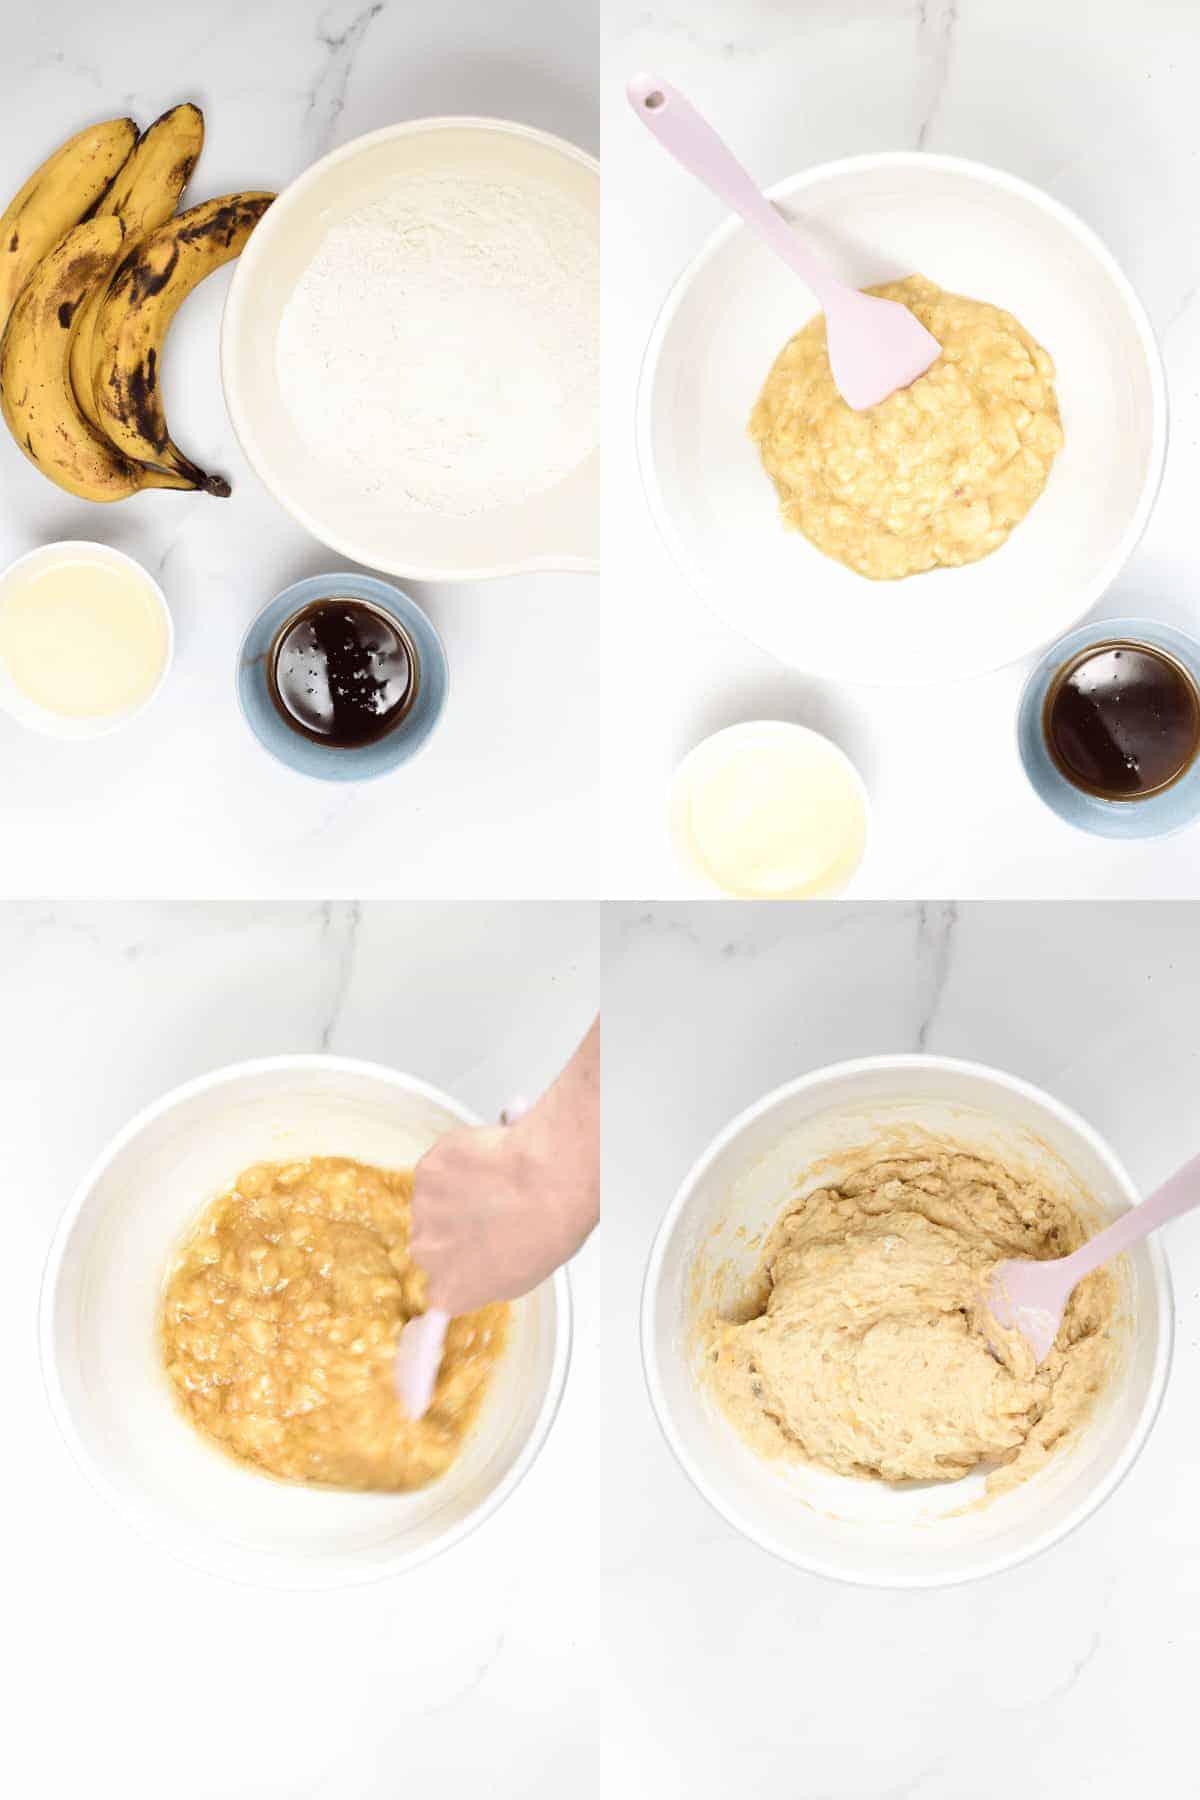 How to make 4-INGREDIENTS BANANA BREAD